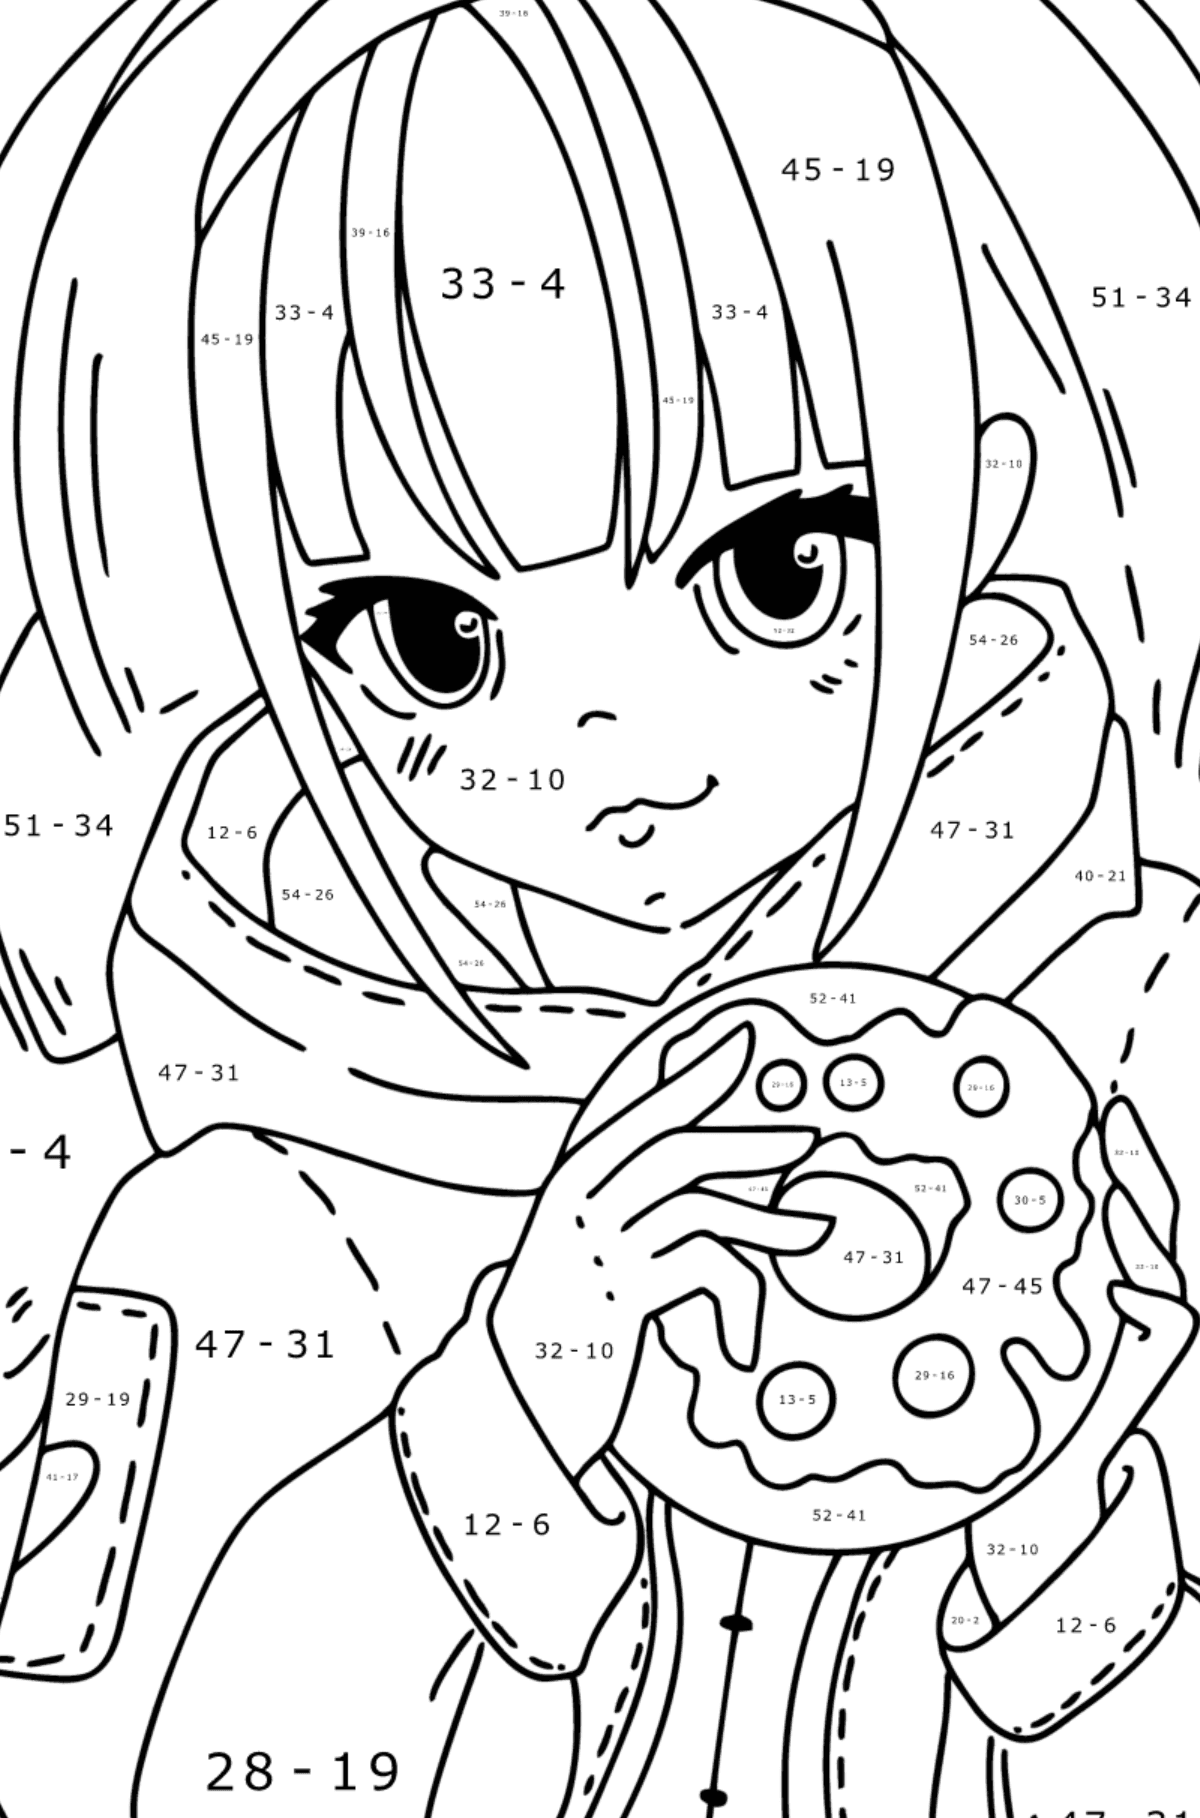 Japanese anime girl coloring page - Math Coloring - Subtraction for Kids